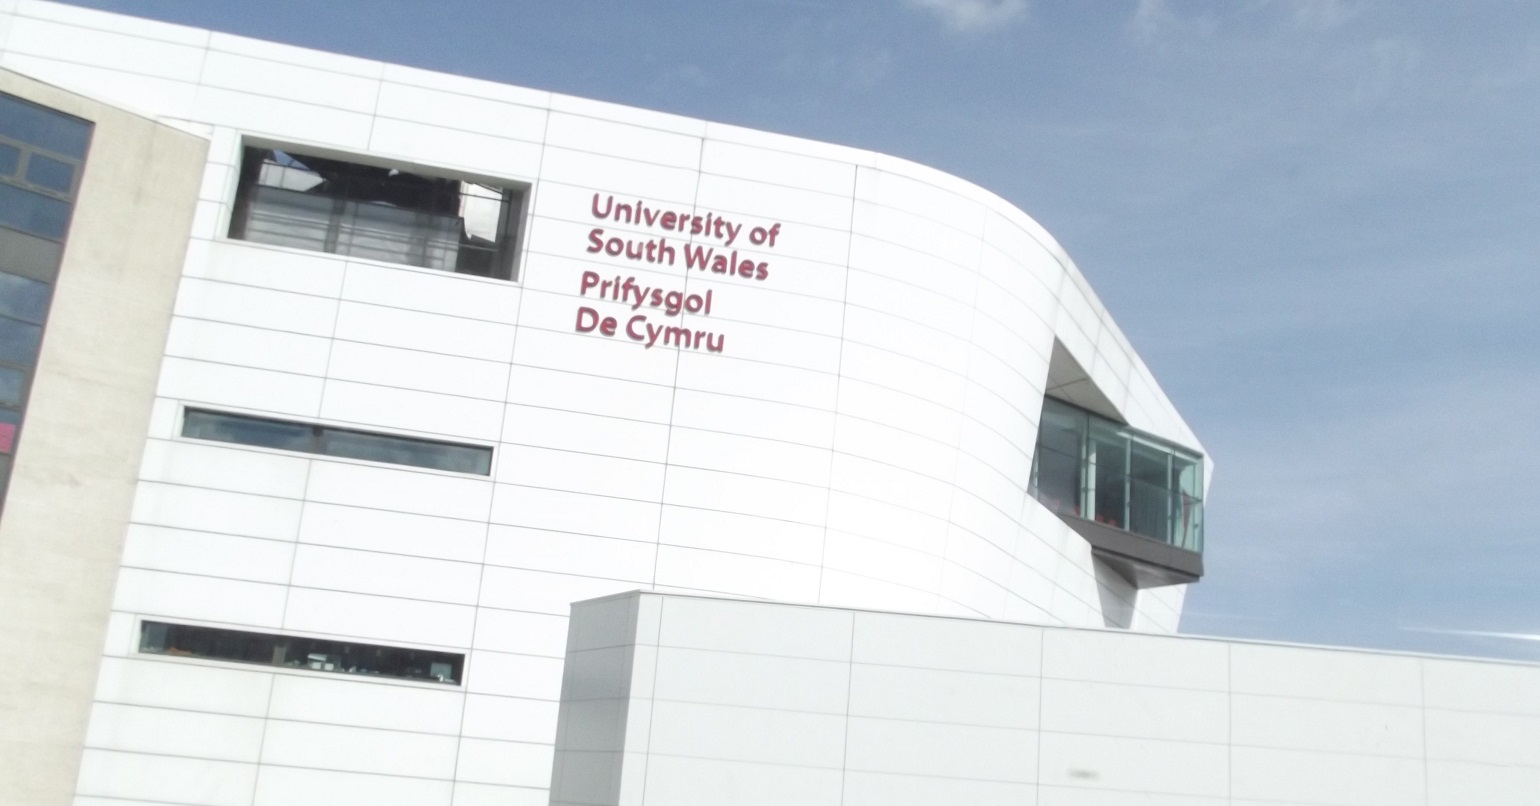 A University of South Wales building